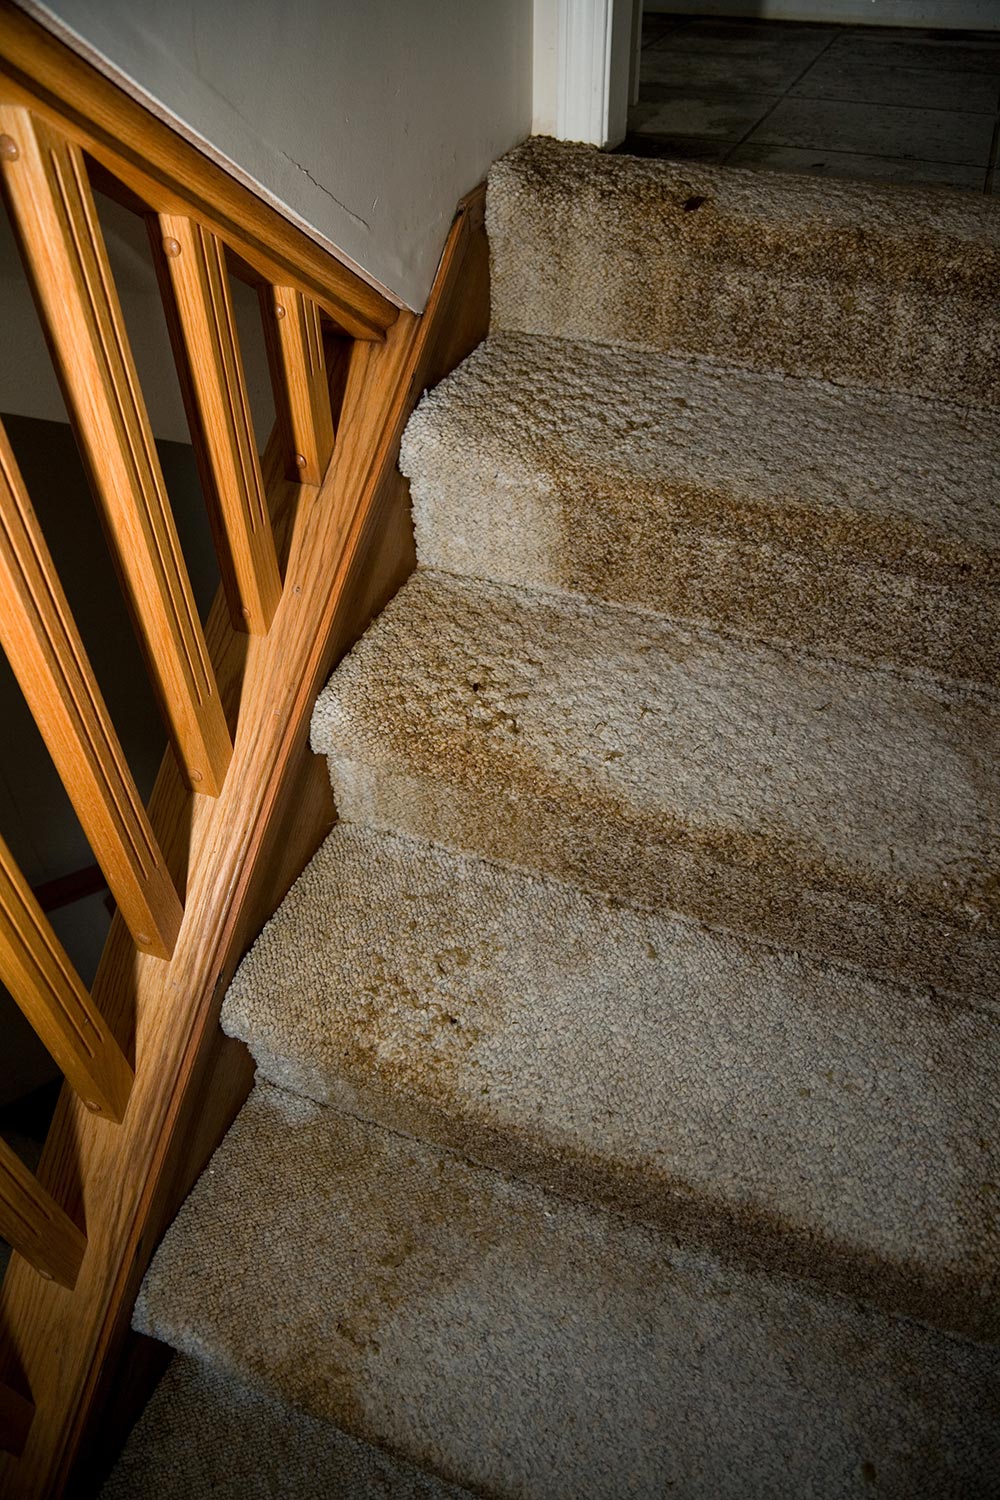 A view of water leaking on the stairs of a home